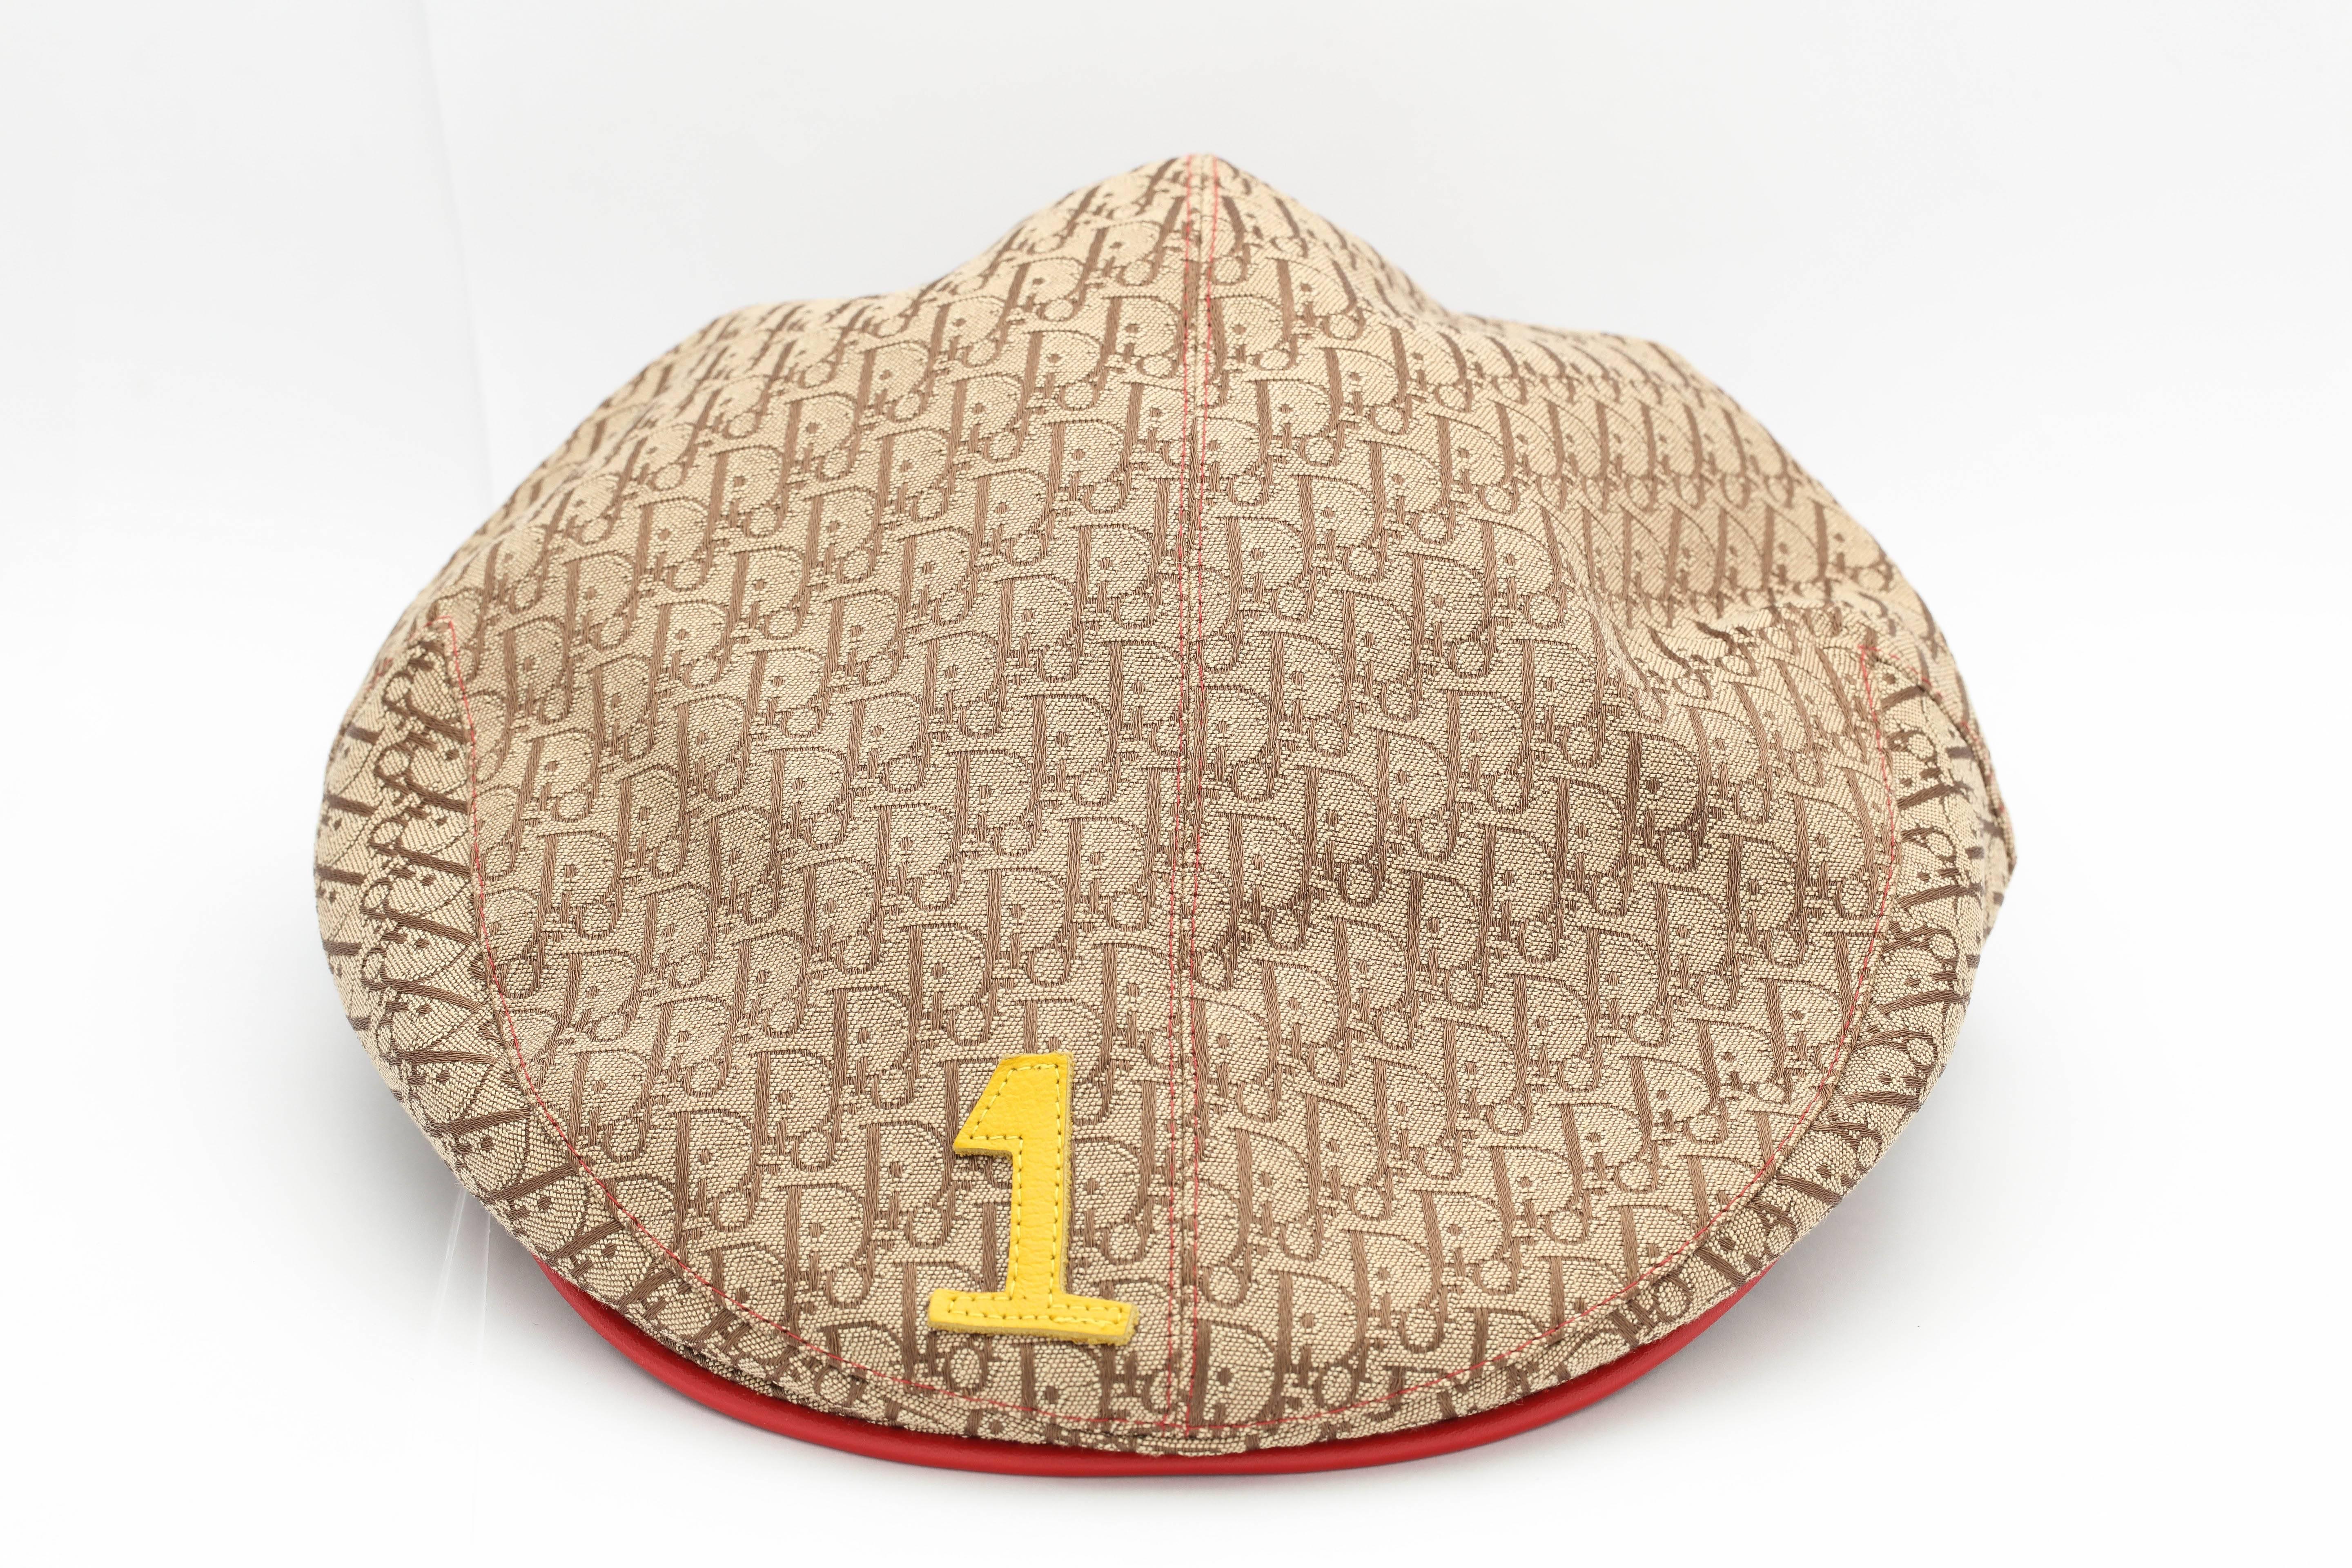 John Galliano for Christian Dior logo hat with 